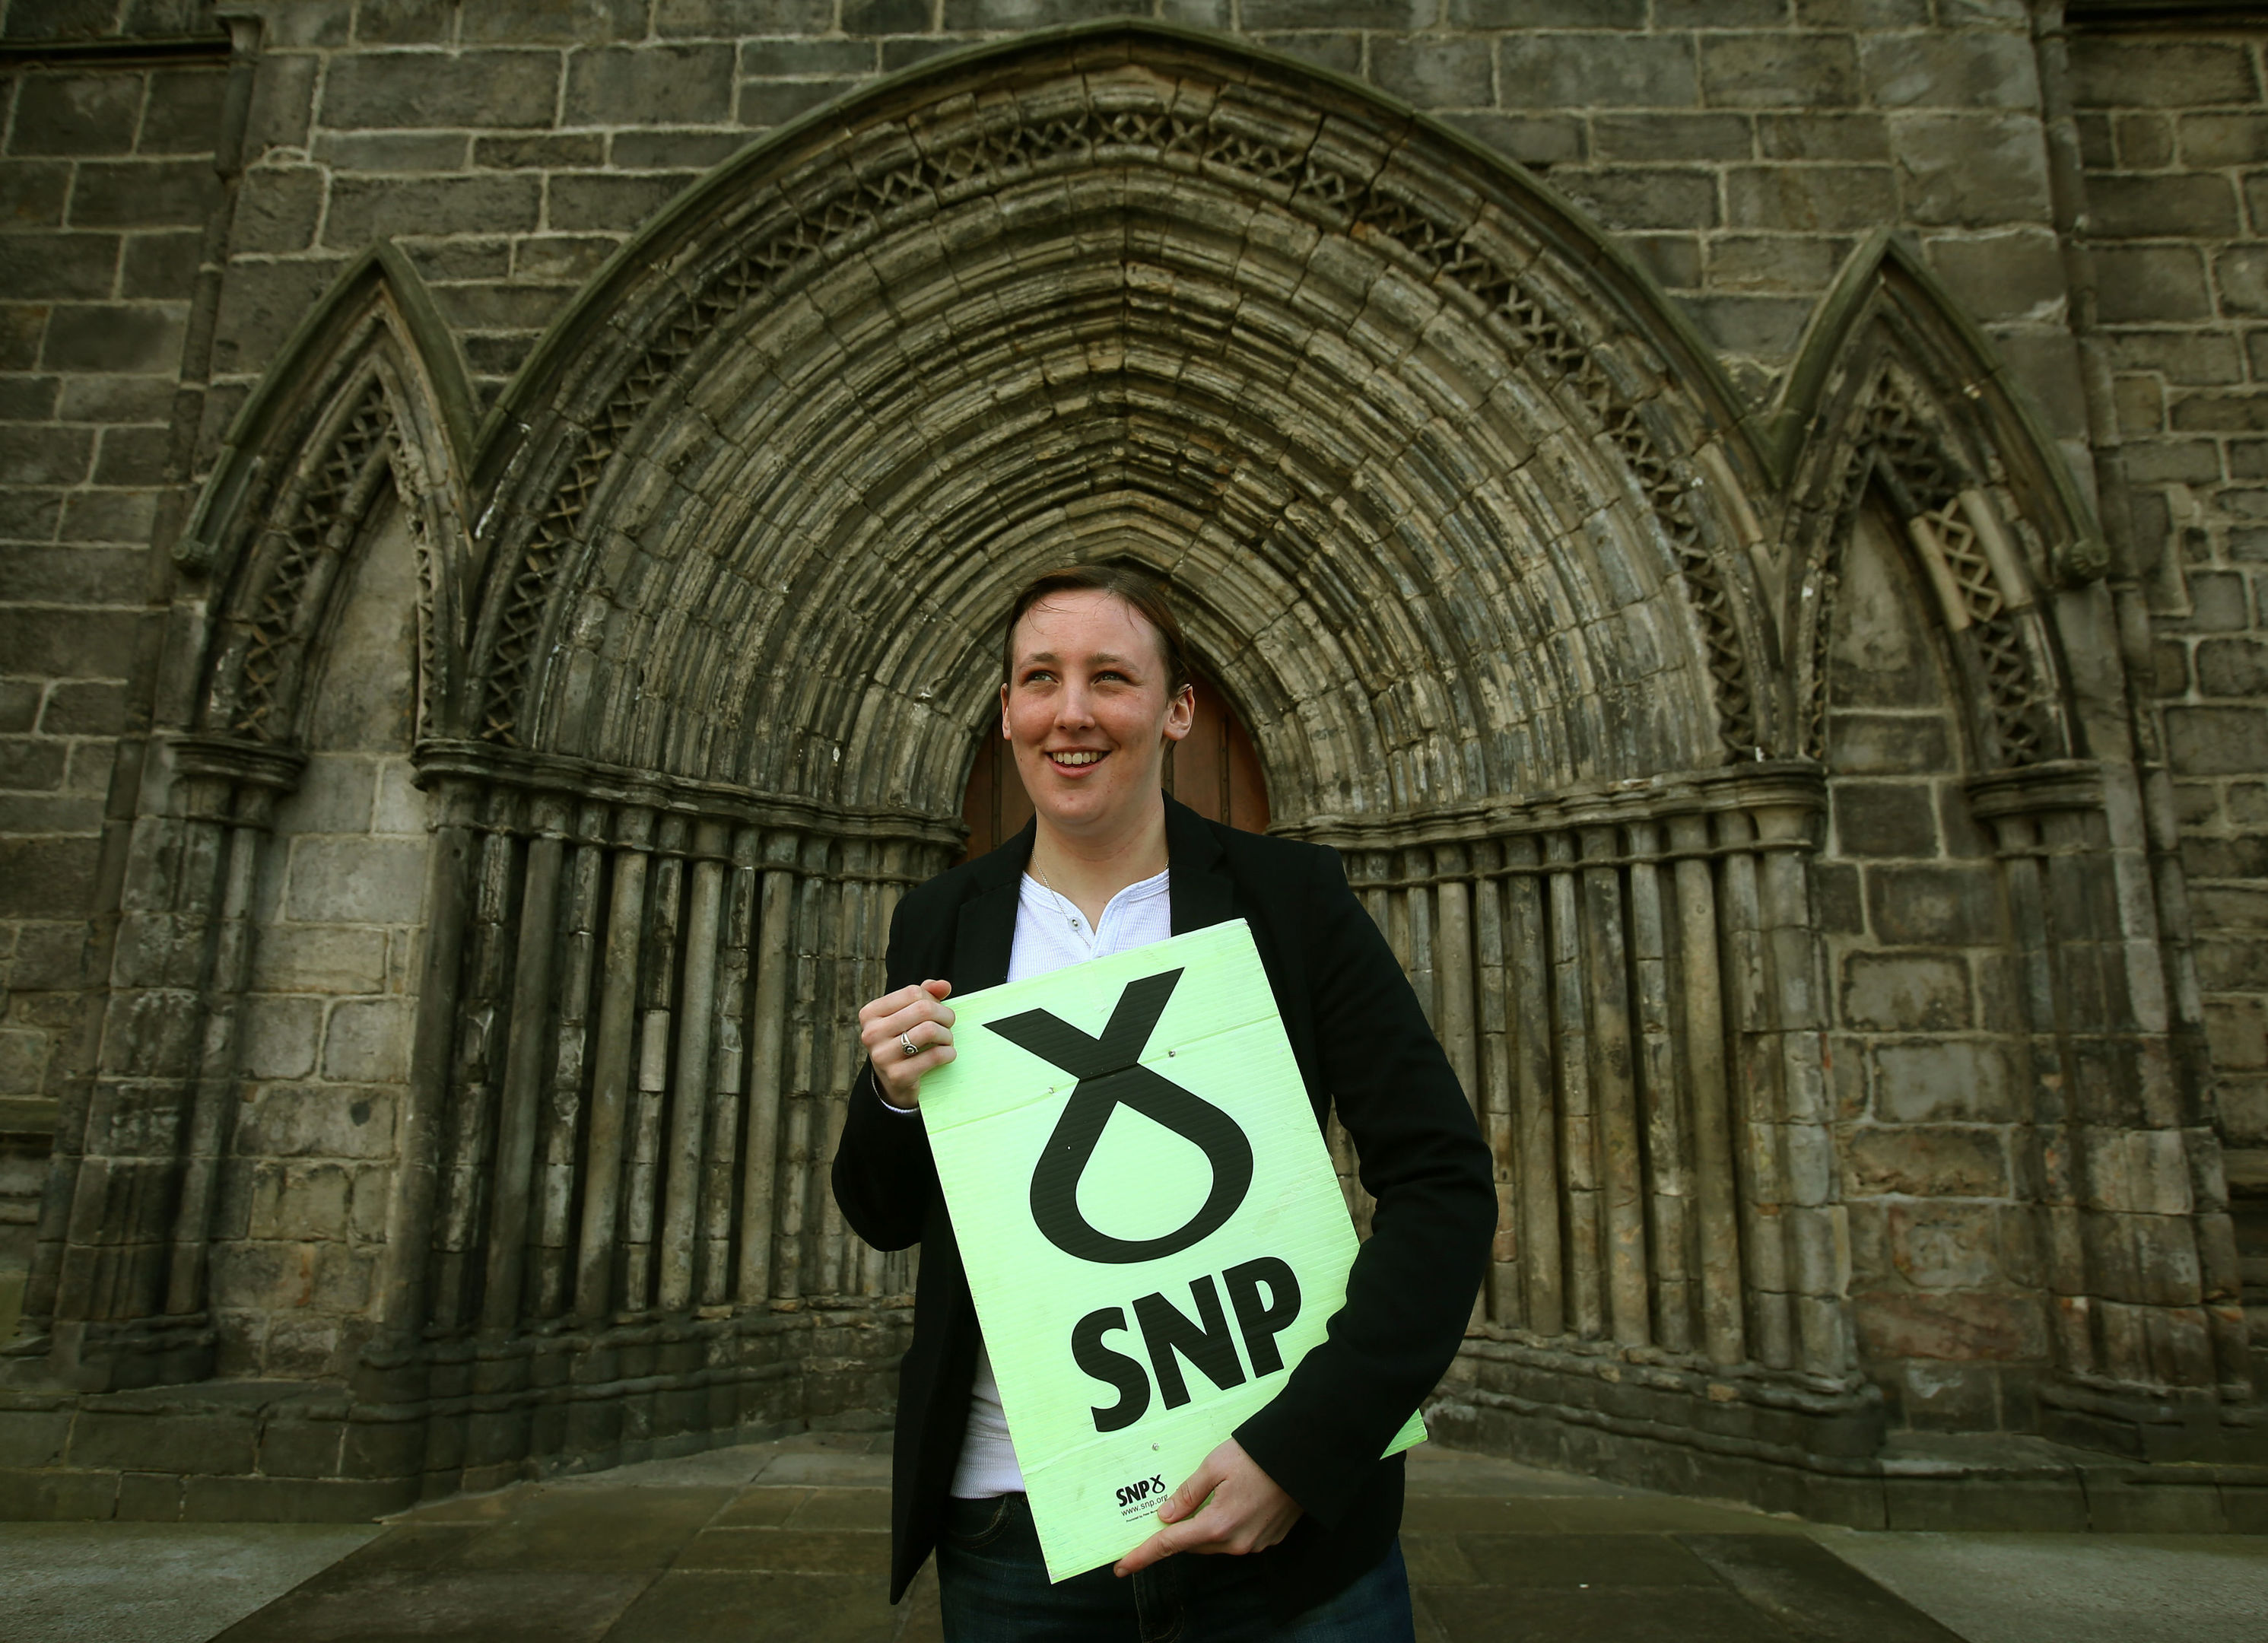 SNP MP Mhairi Black on the local election campaign trail at Paisley Abbey. (Andrew Milligan/PA Wire)